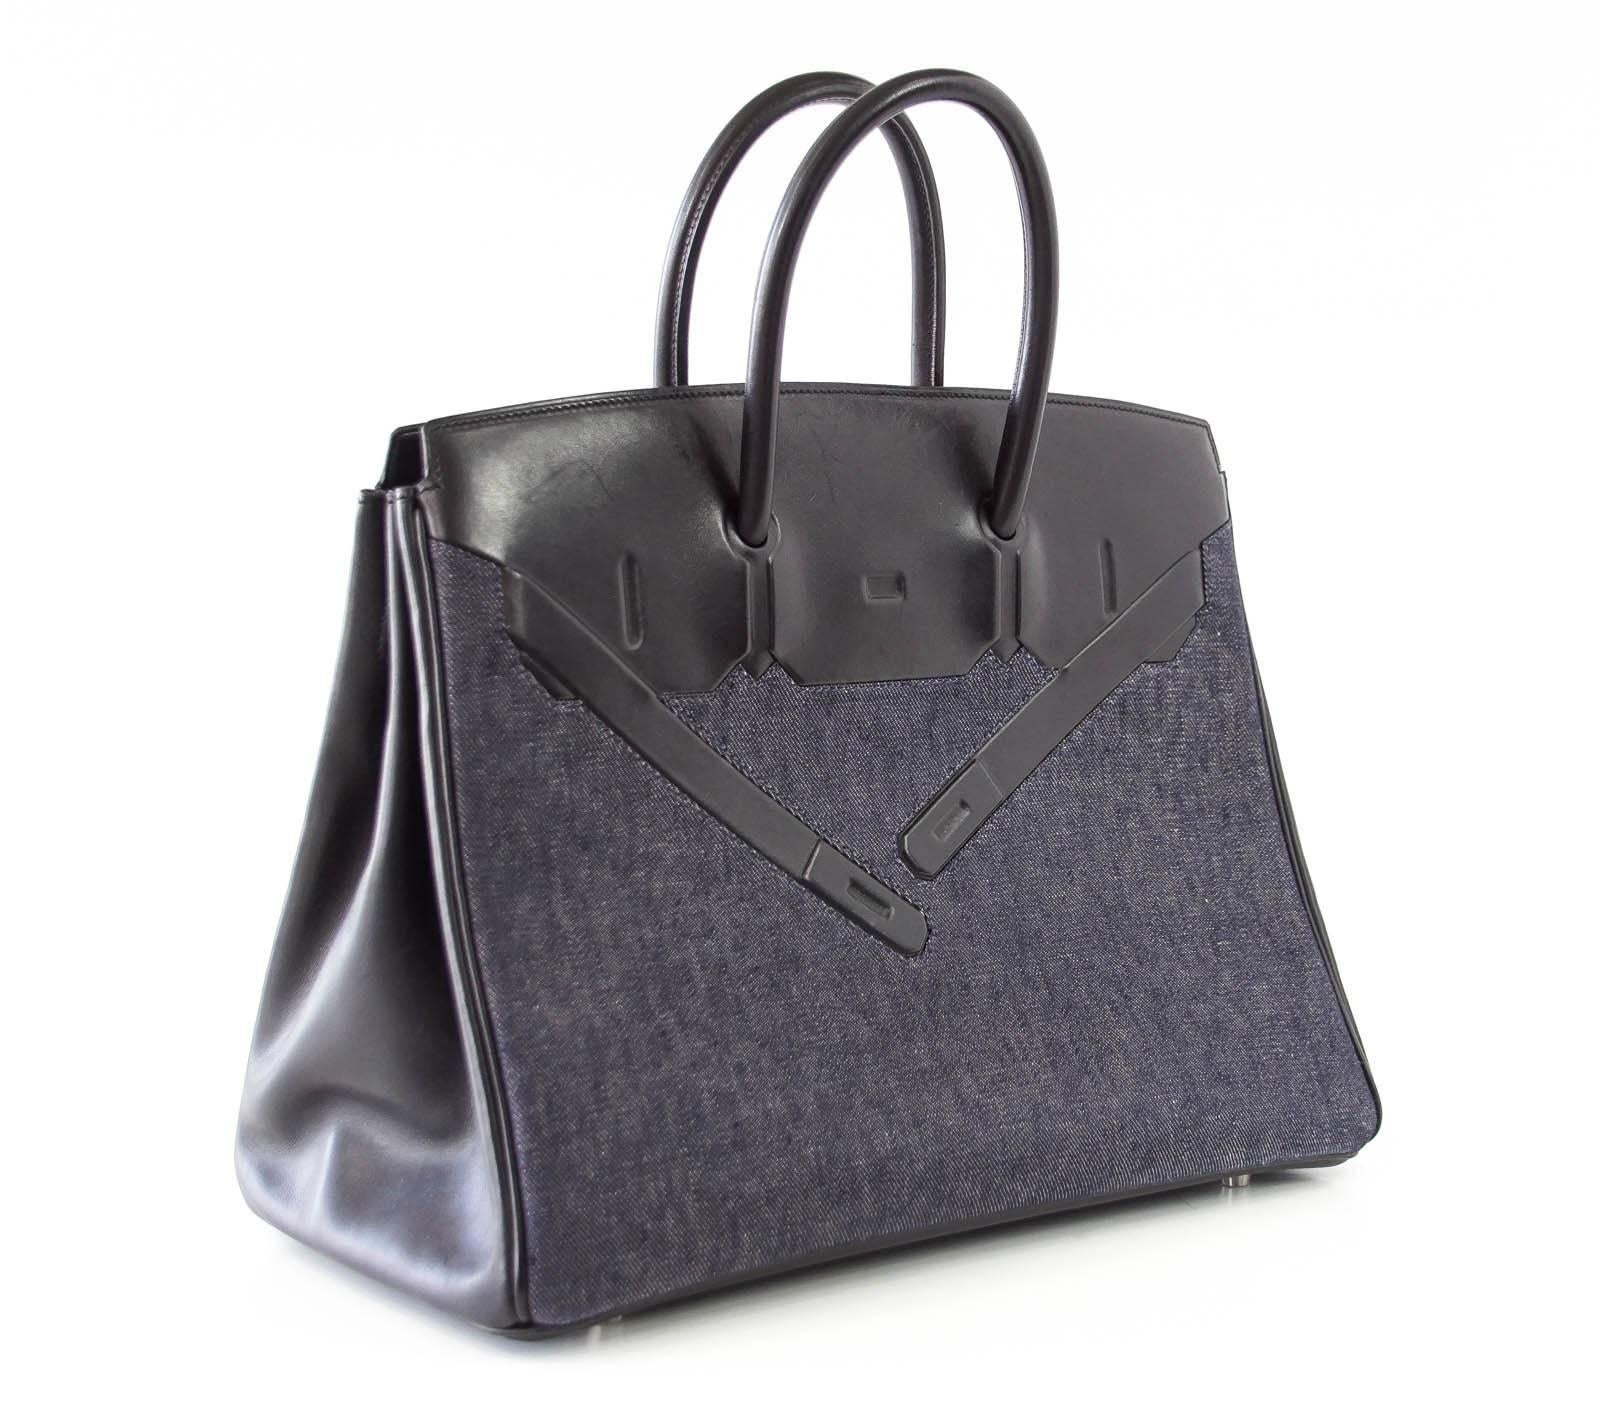 Guaranteed authentic very rare Limited Edition Shadow Denim Birkin.
This is a true Collectors treasure.
This beautiful bag conceived by Jean Paul Gaultier is the ultimate trompe l'oeil.
Comes with sleeper.
Just returned from TLC at Hermes